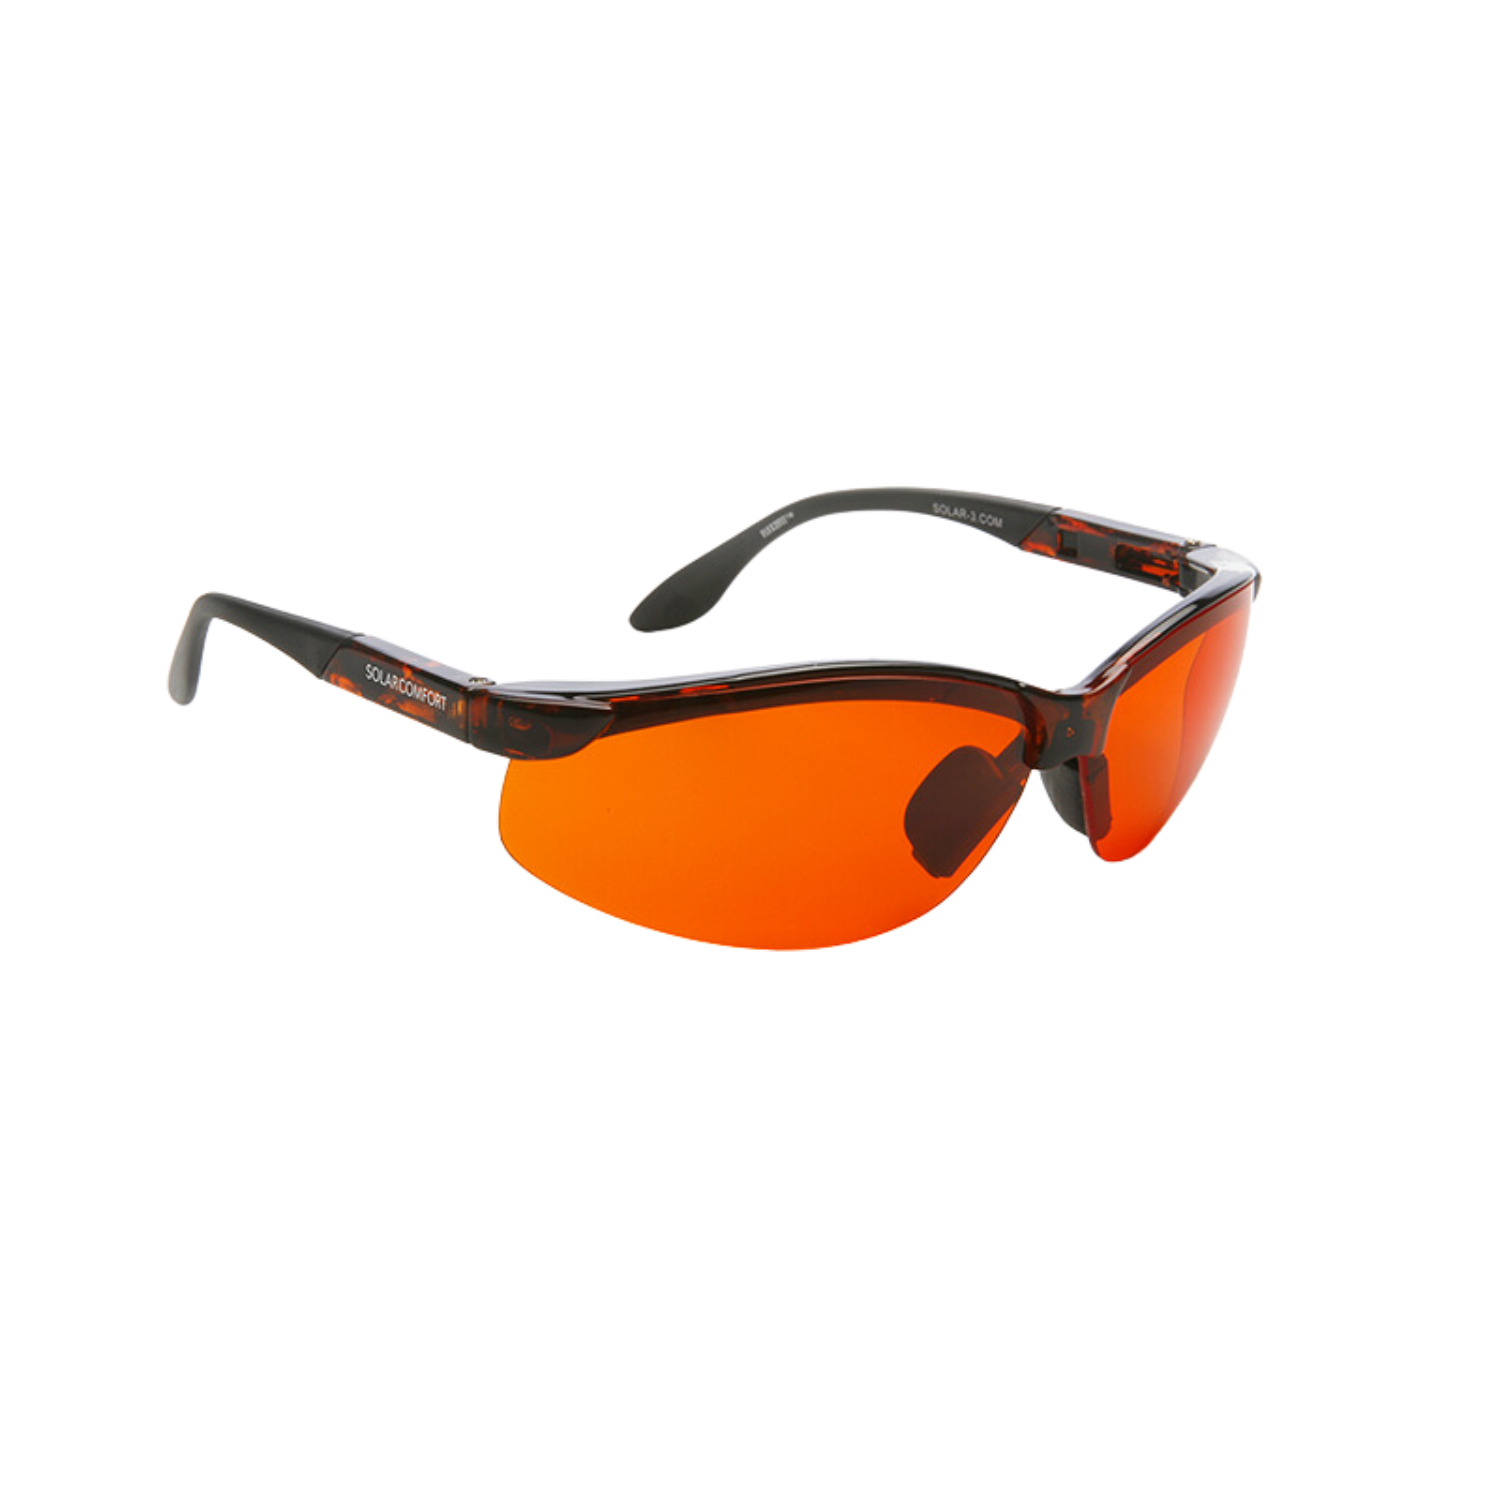 Image of the SolarComfort glare reduction sunglasses with orange tinted lenses from Eschenbach.